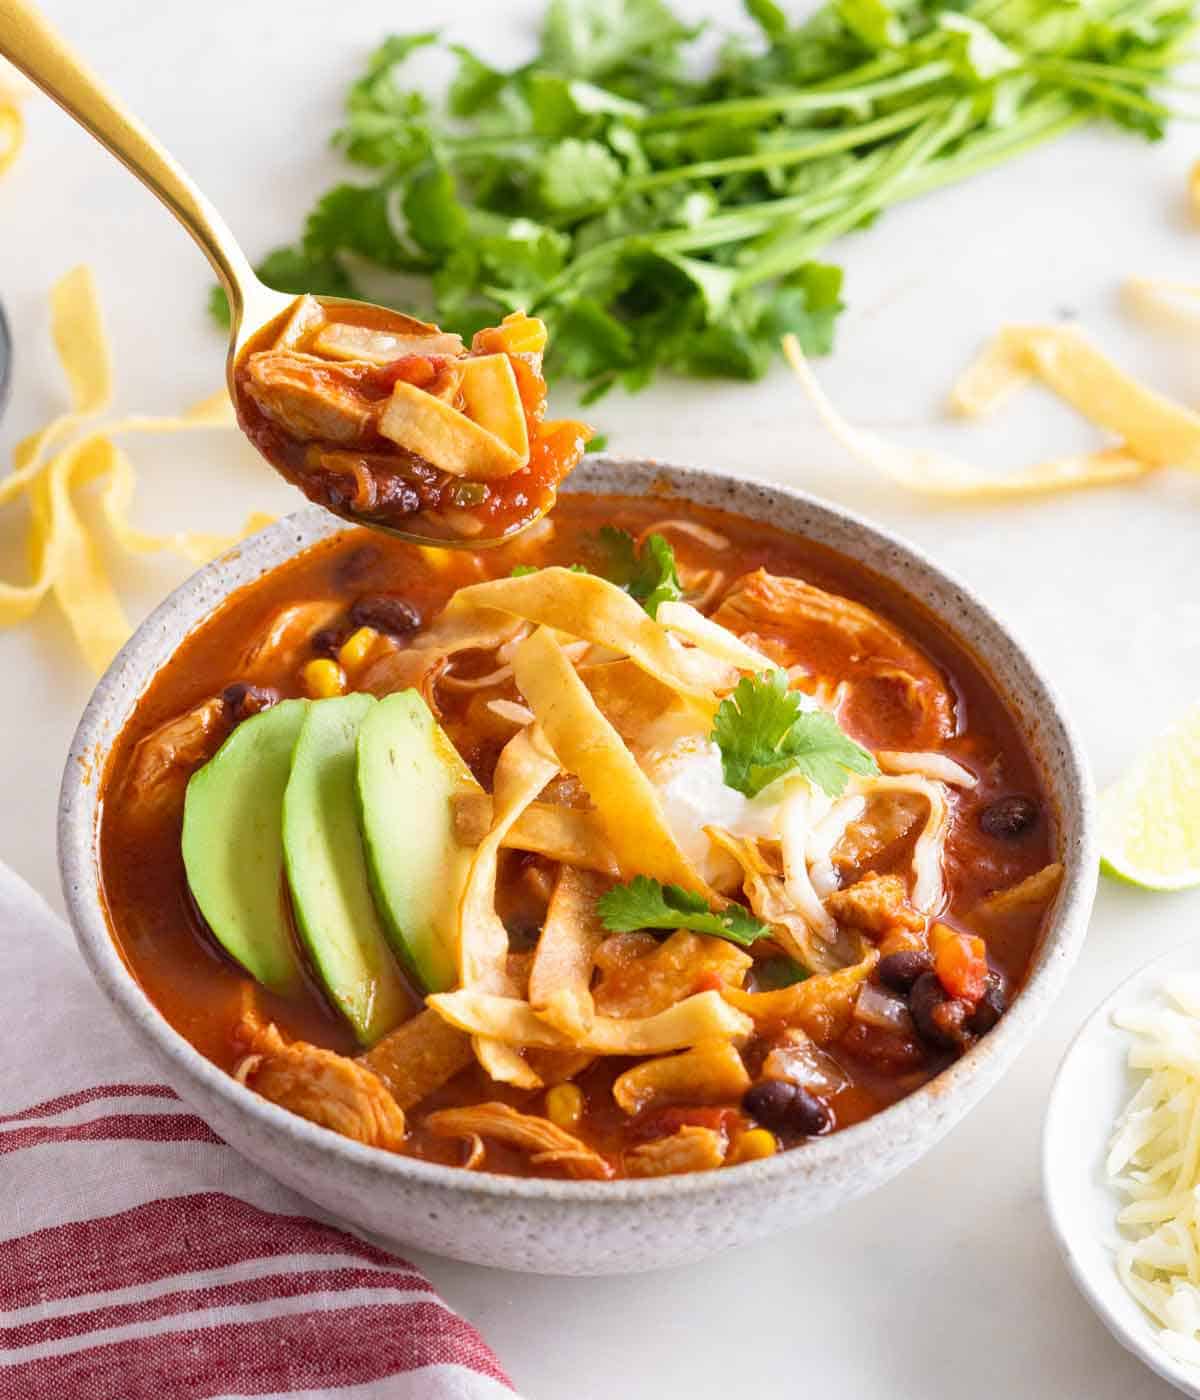 A spoonful of chicken tortilla soup lifted from the bowl.